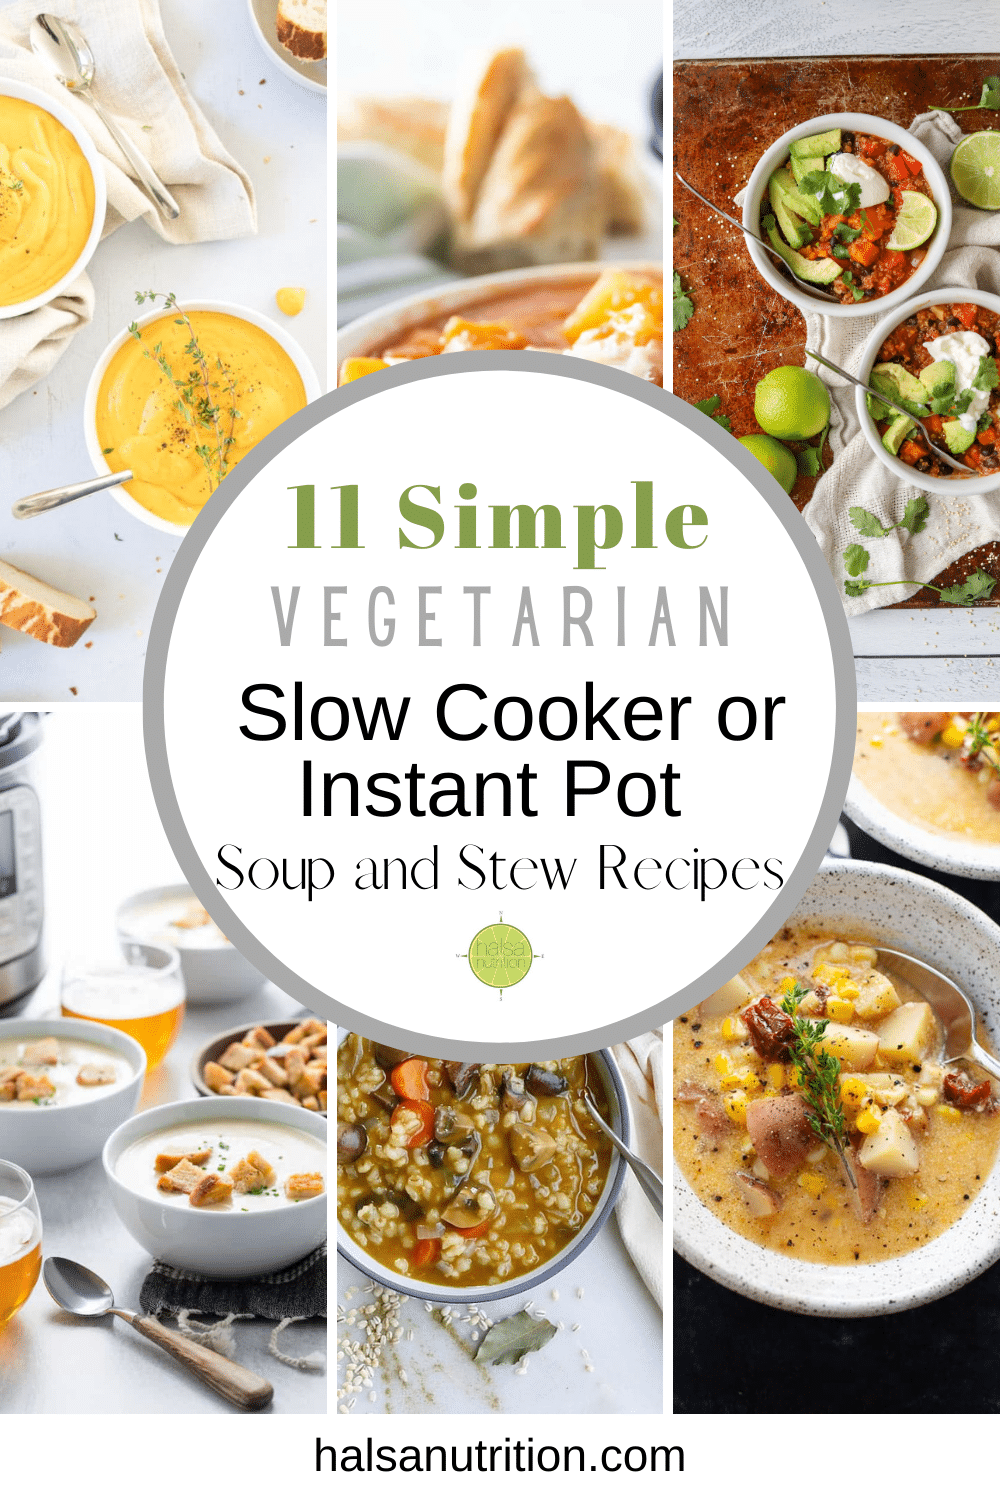 11 Simple Vegetarian Slow Cooker or Instant Pot Soup and Stew Recipes ...